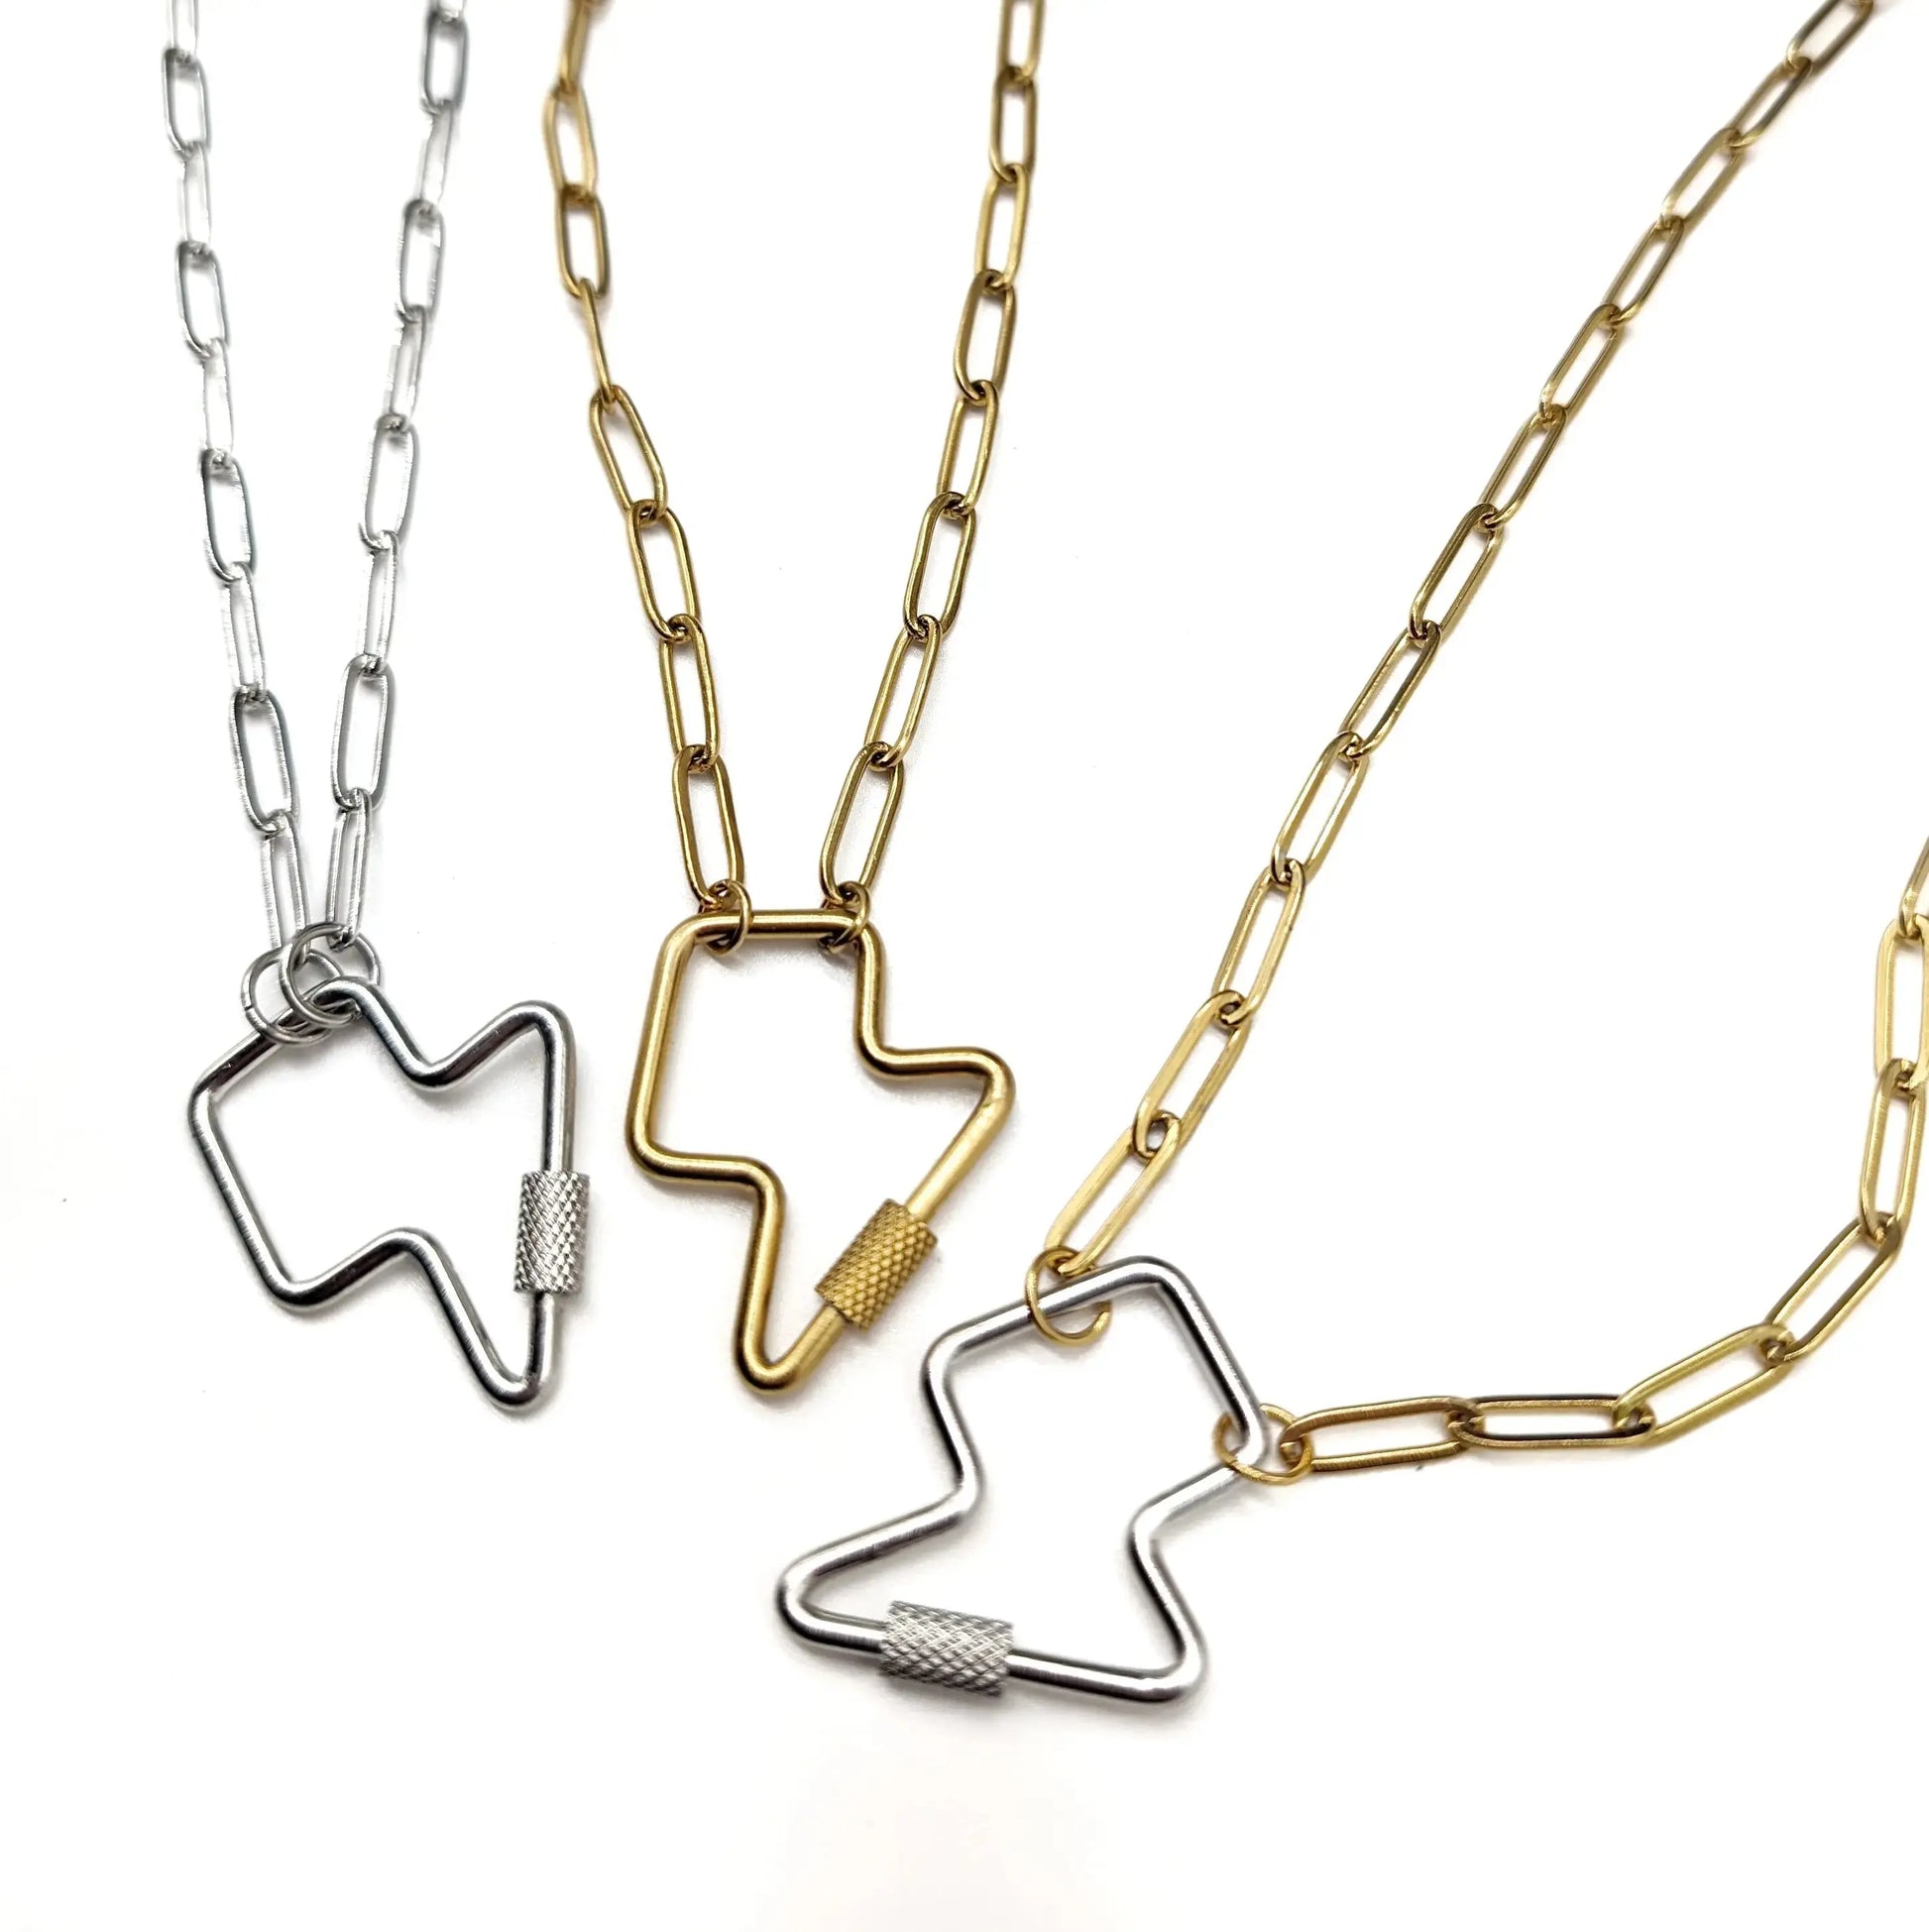 Lightning bolt charm collector necklace - Trend Tonic